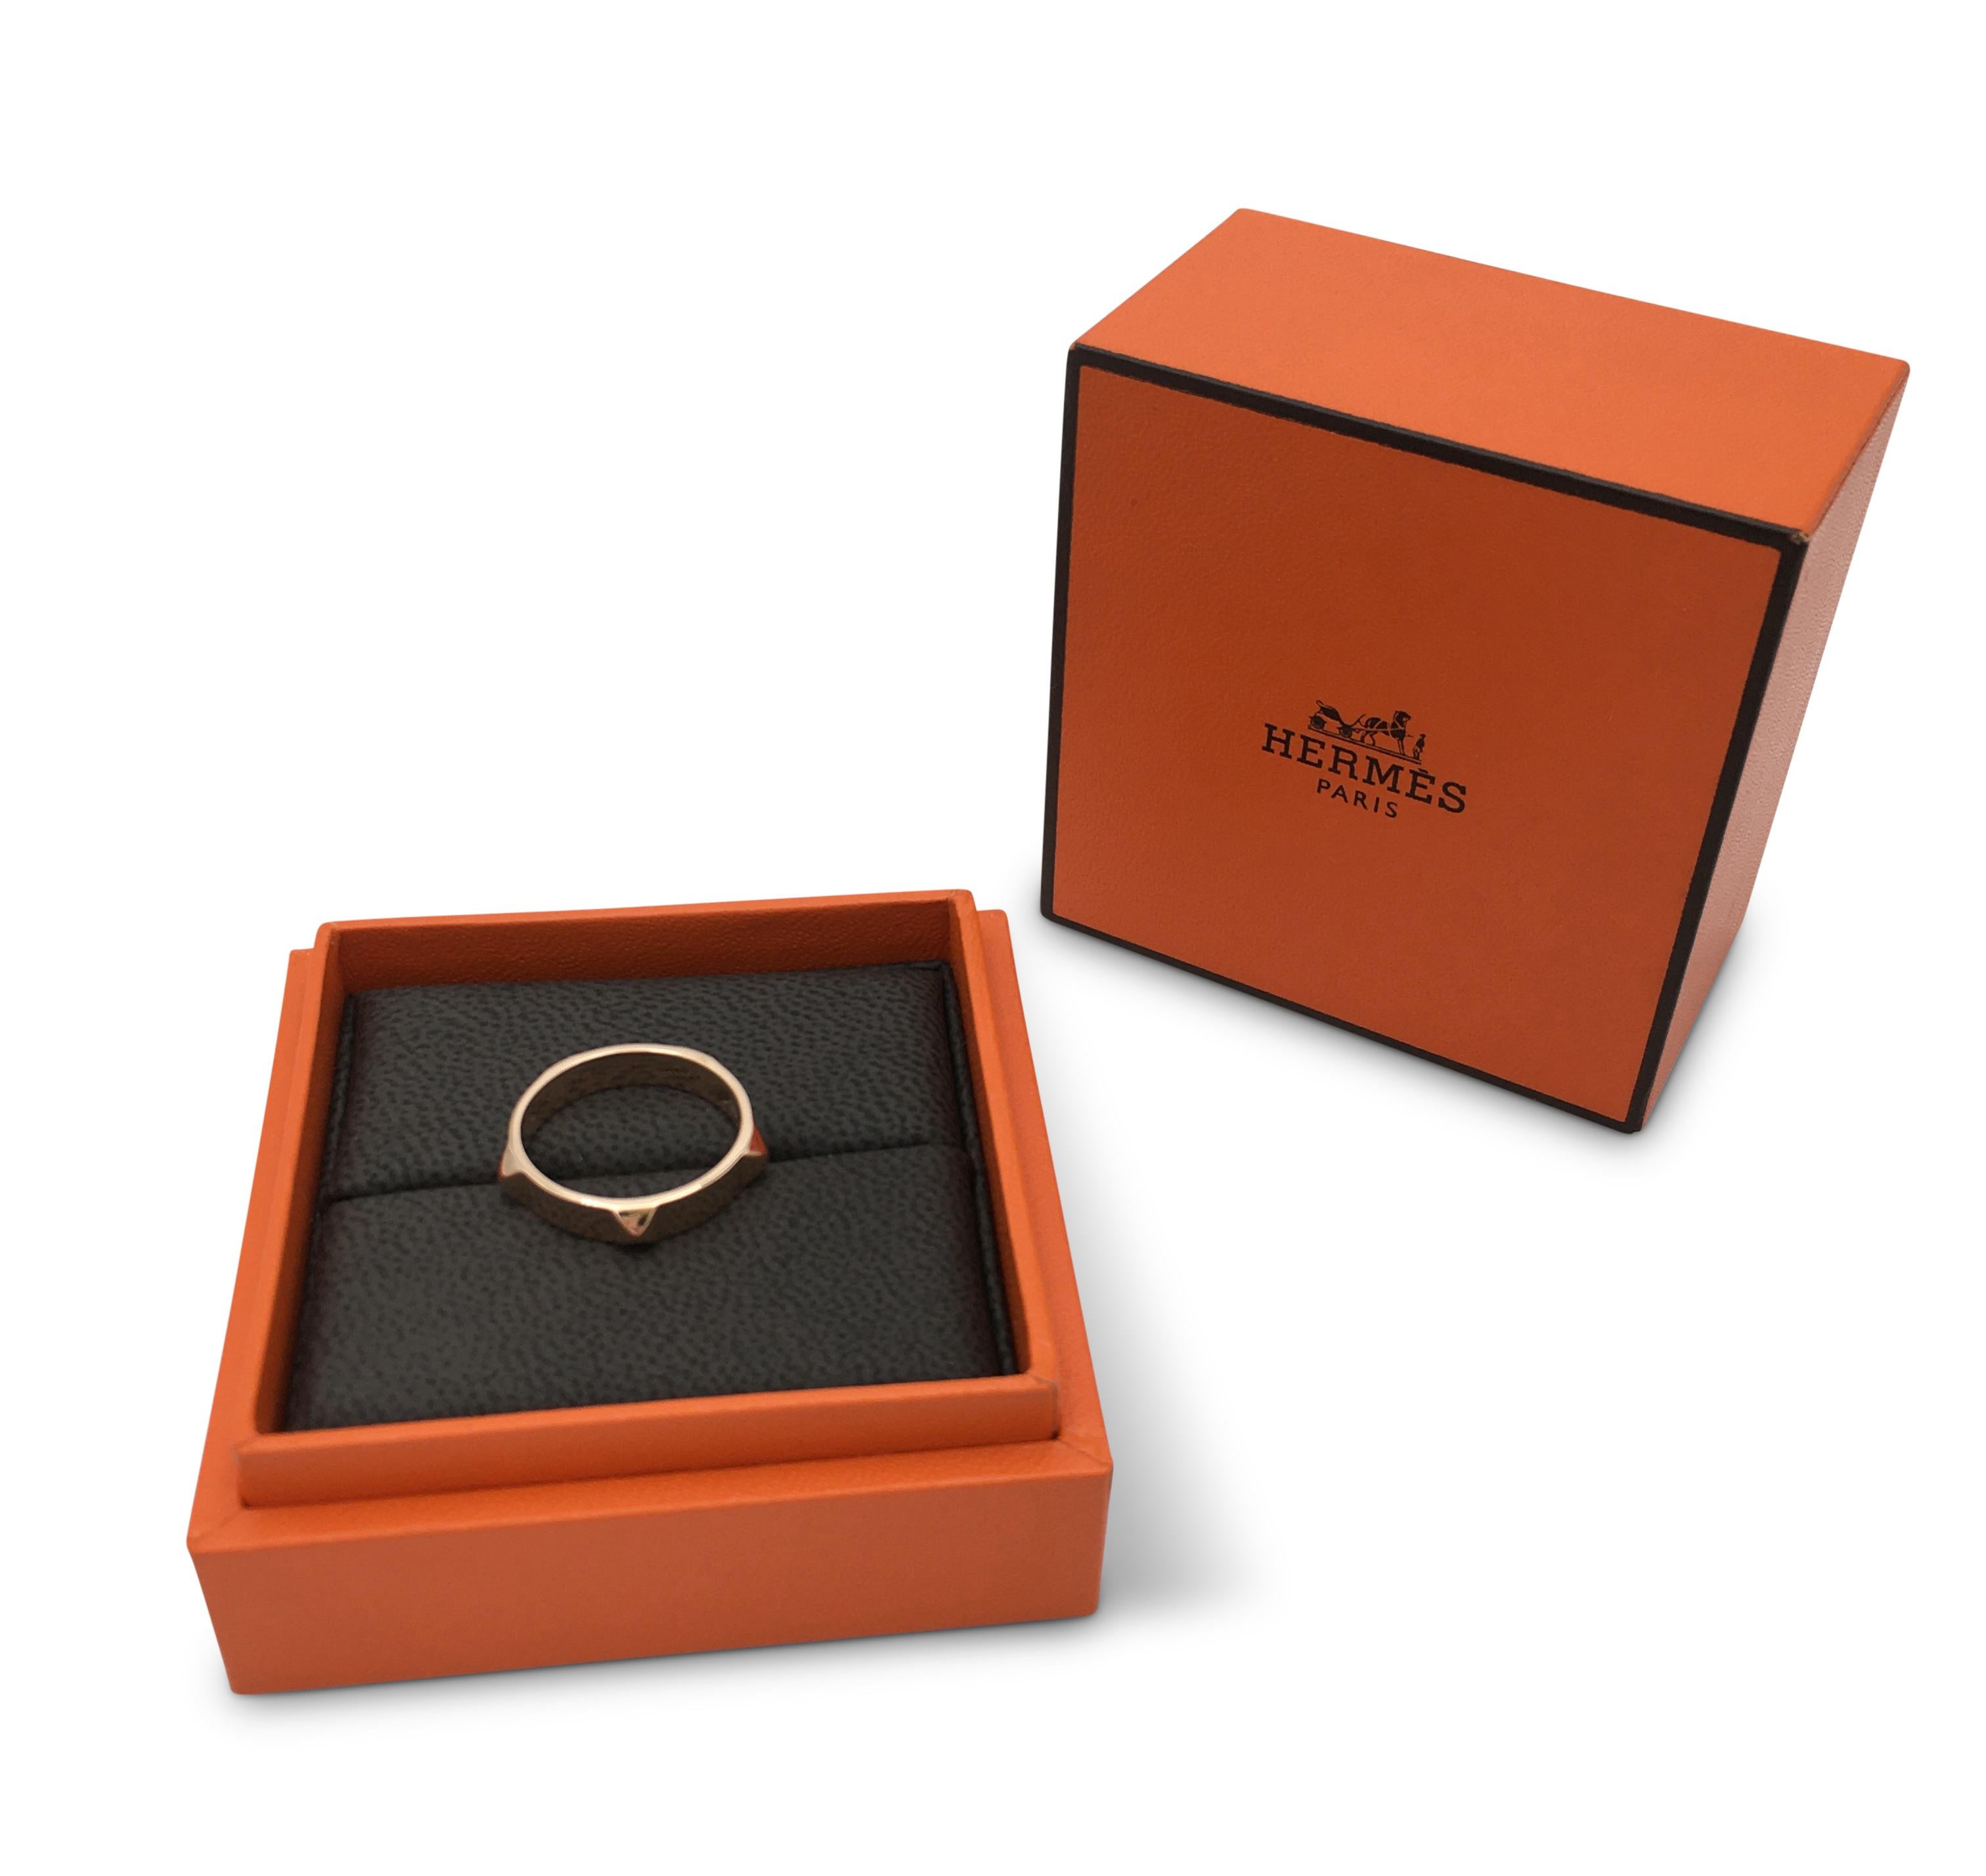 Authentic Hermes 'Mini Clous' ring crafted in 18 karat rose gold features domed four sided studs all around. Signed Hermes, 750, Made in Italy, with serial number and hallmarks. Ring size 54 (US 7). Presented with original box, no papers. CIRCA